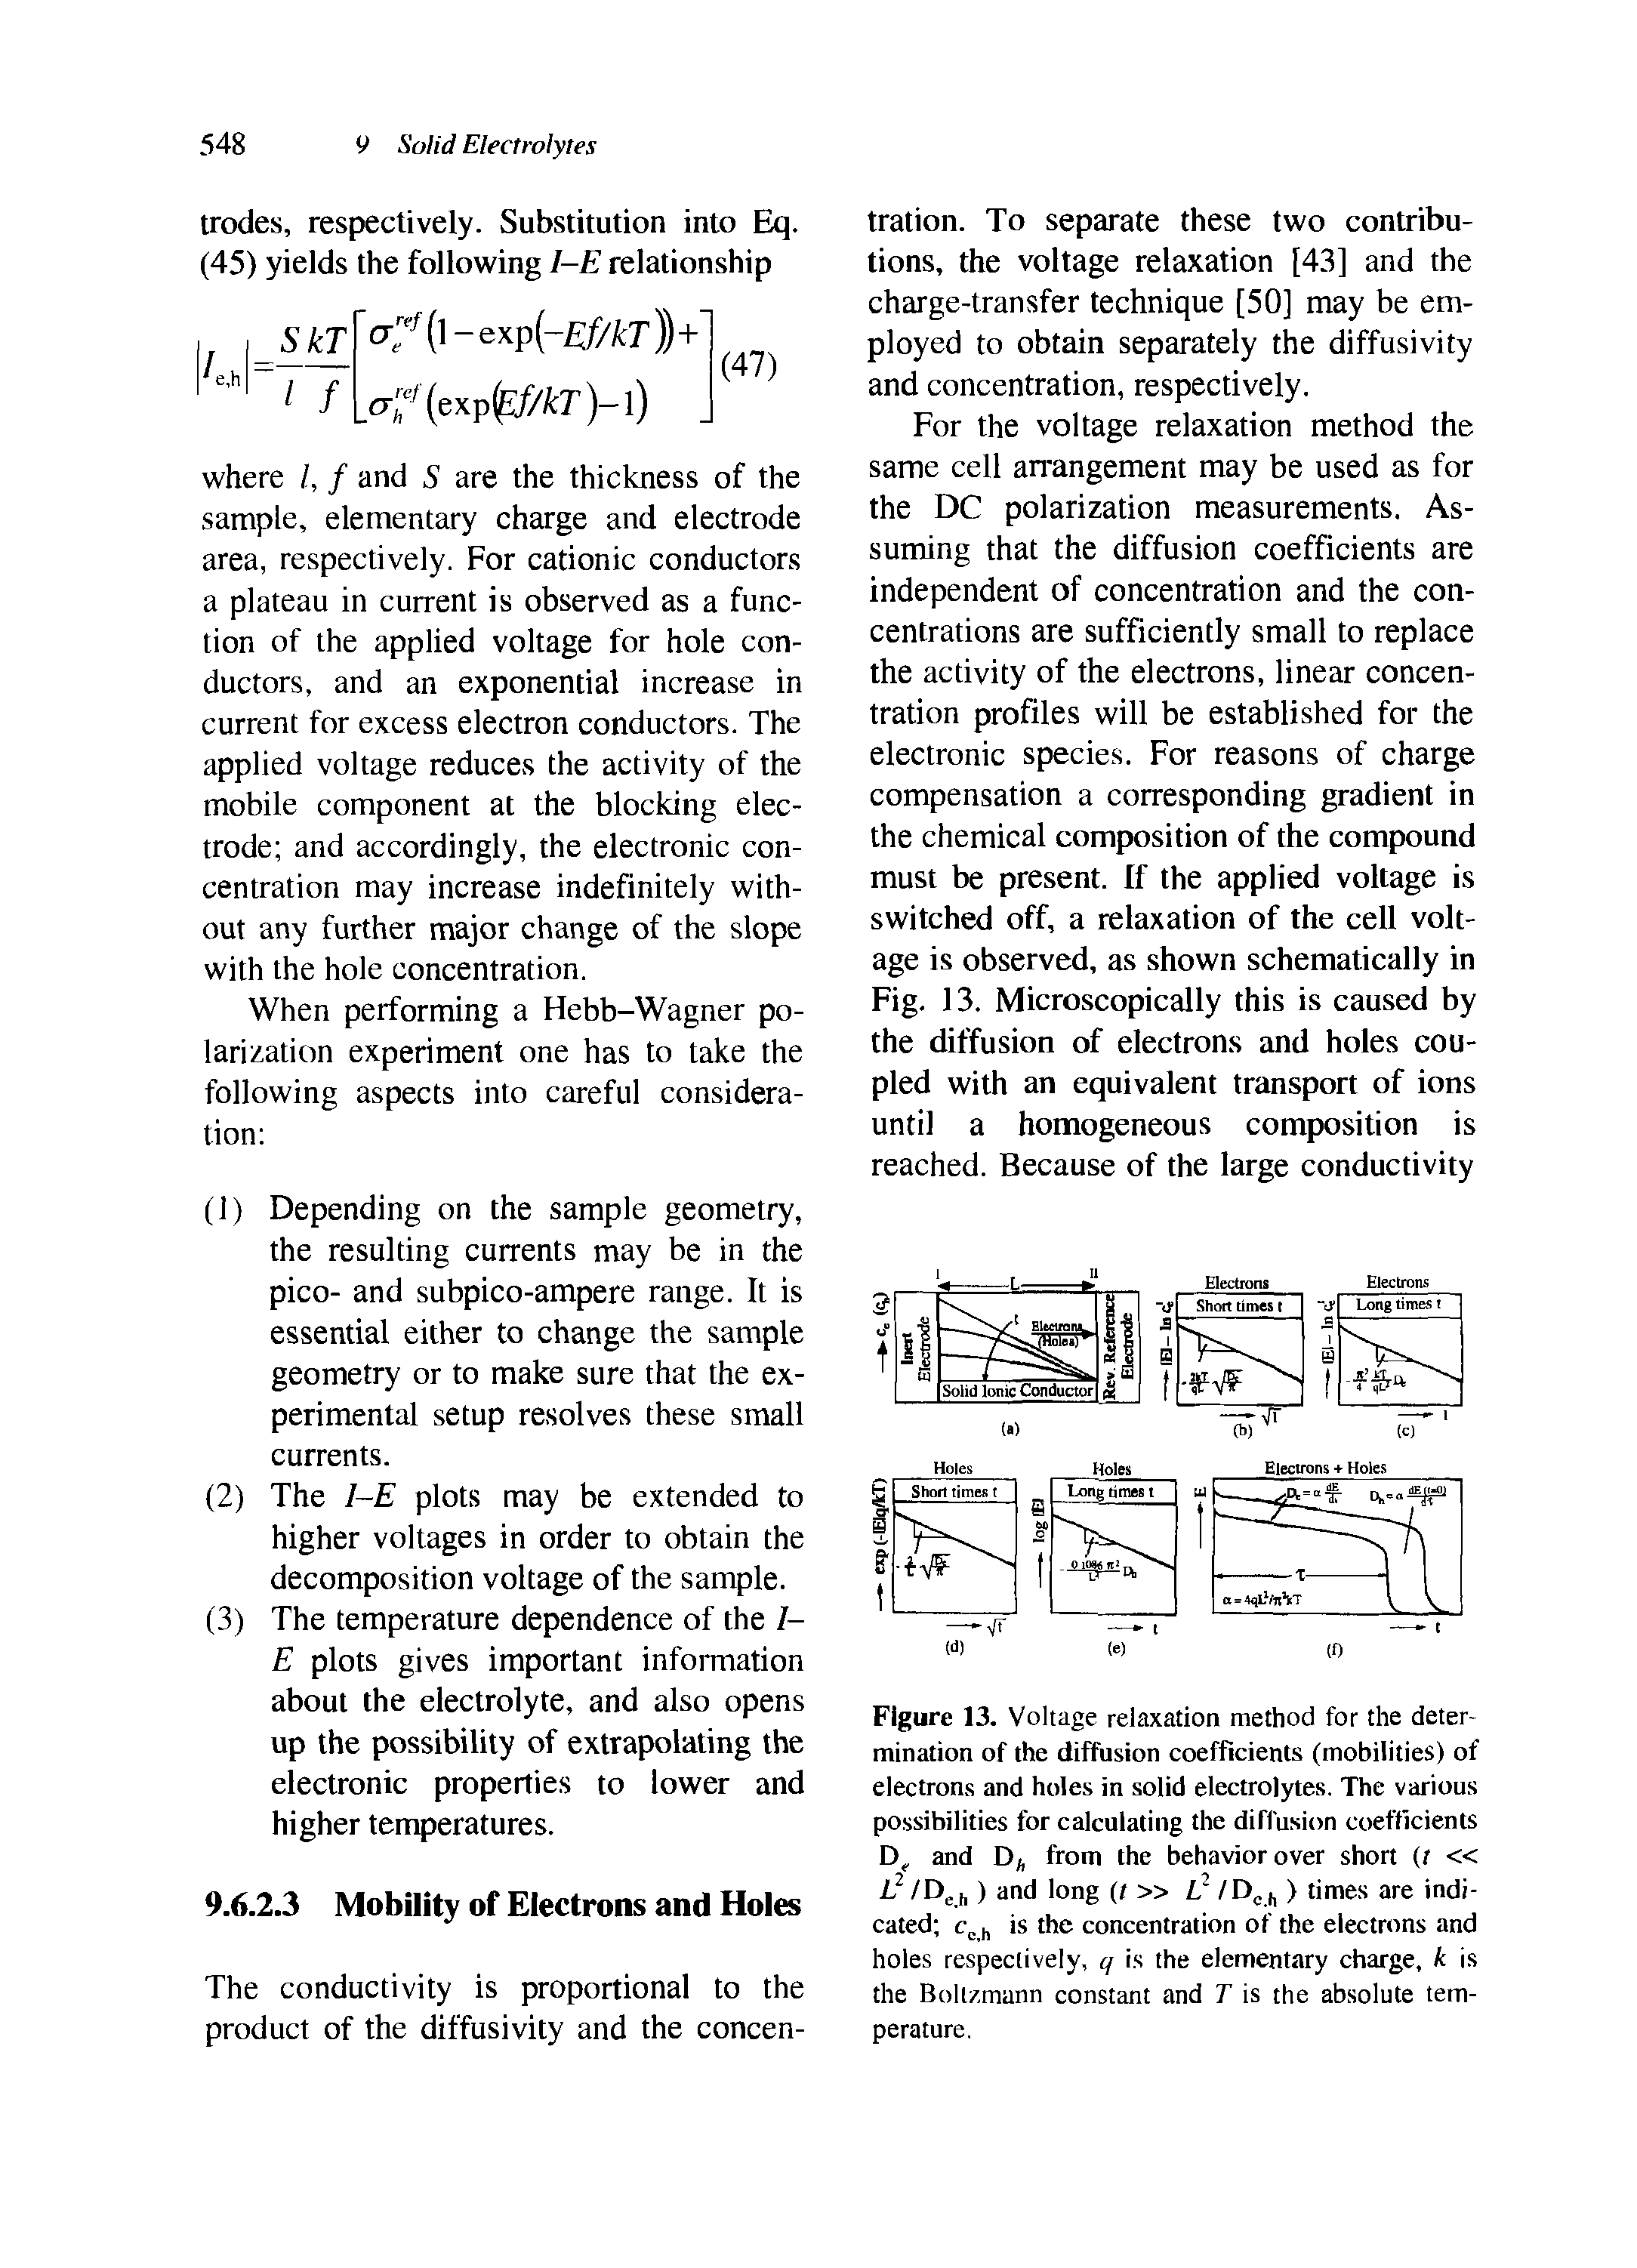 Figure 13. Voltage relaxation method for the determination of the diffusion coefficients (mobilities) of electrons and holes in solid electrolytes. The various possibilities for calculating the diffusion coefficients and from the behavior over short (t L2 /De ) and long (/ L2 /Dc ll ) times are indicated cc h is the concentration of the electrons and holes respectively, q is the elementary charge, k is the Boltzmann constant and T is the absolute temperature.